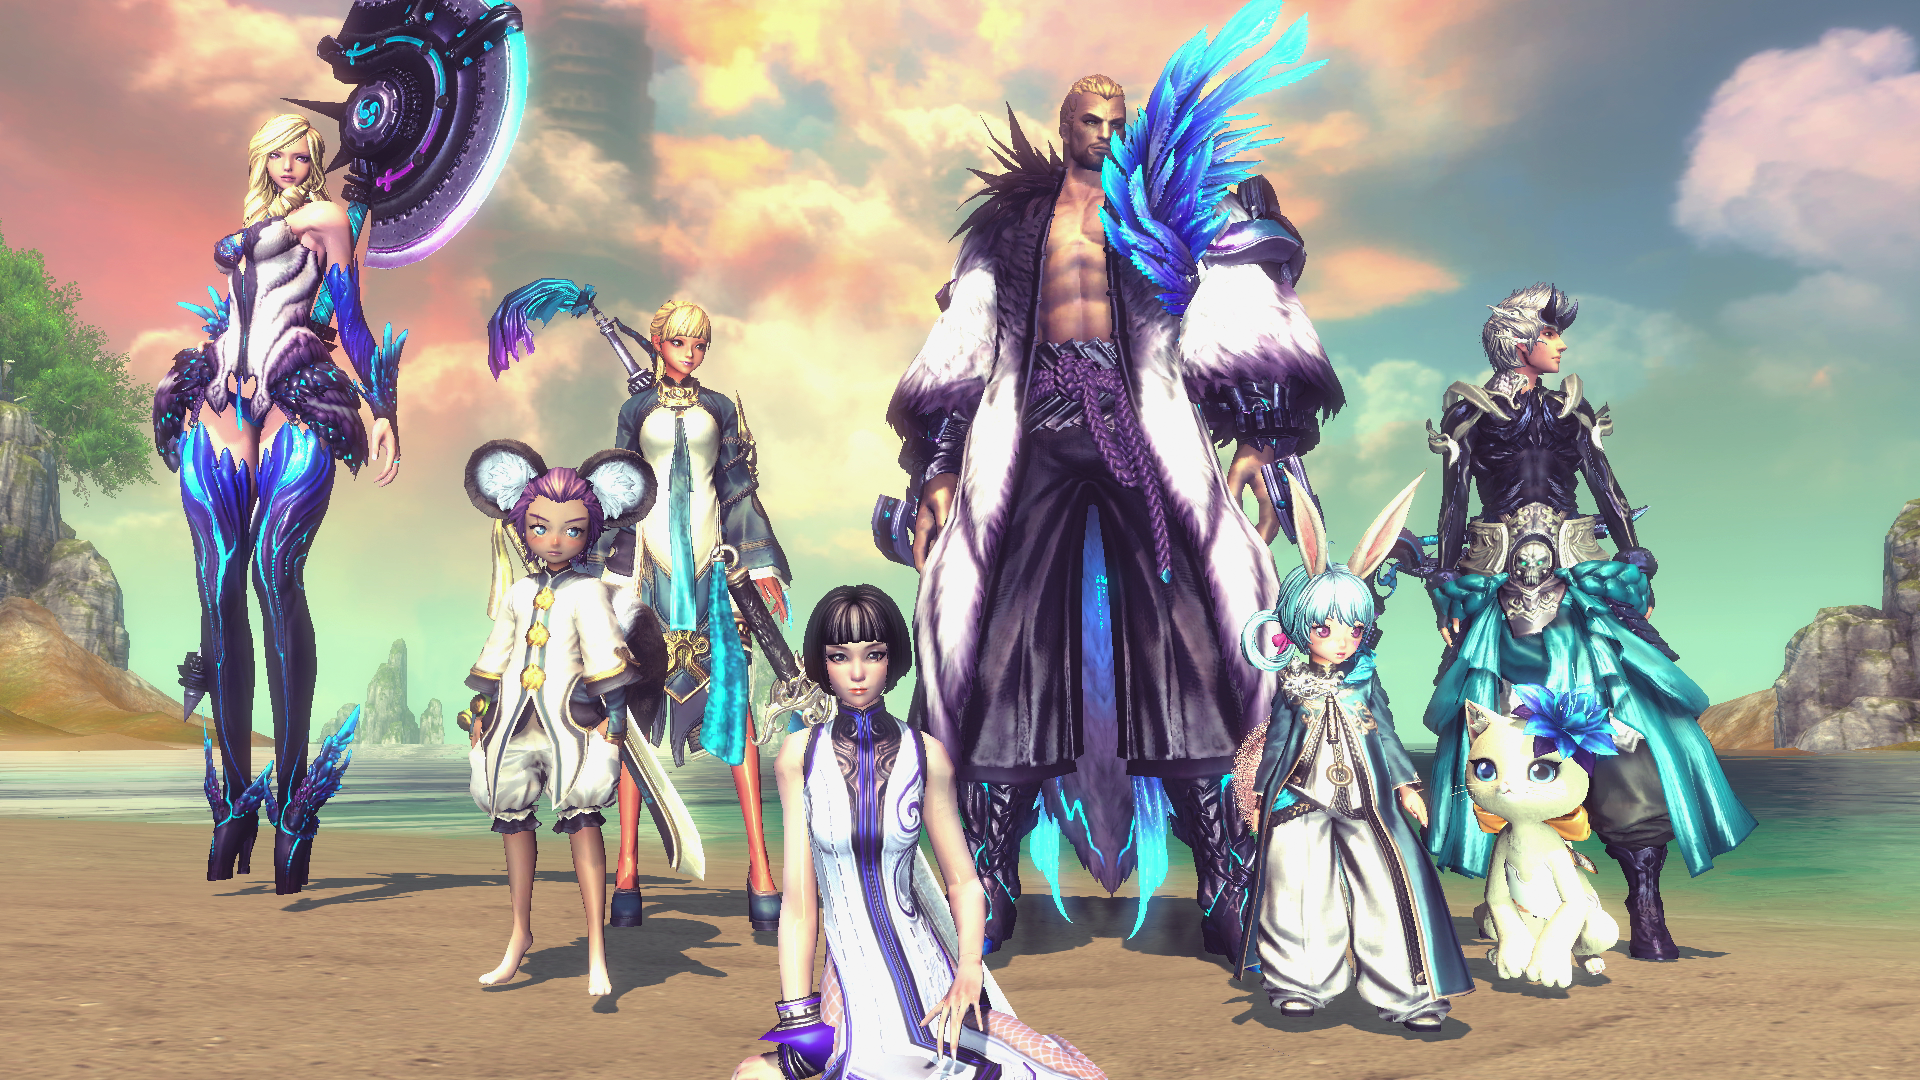 Image for Blade & Soul closed beta test starts at the end of October